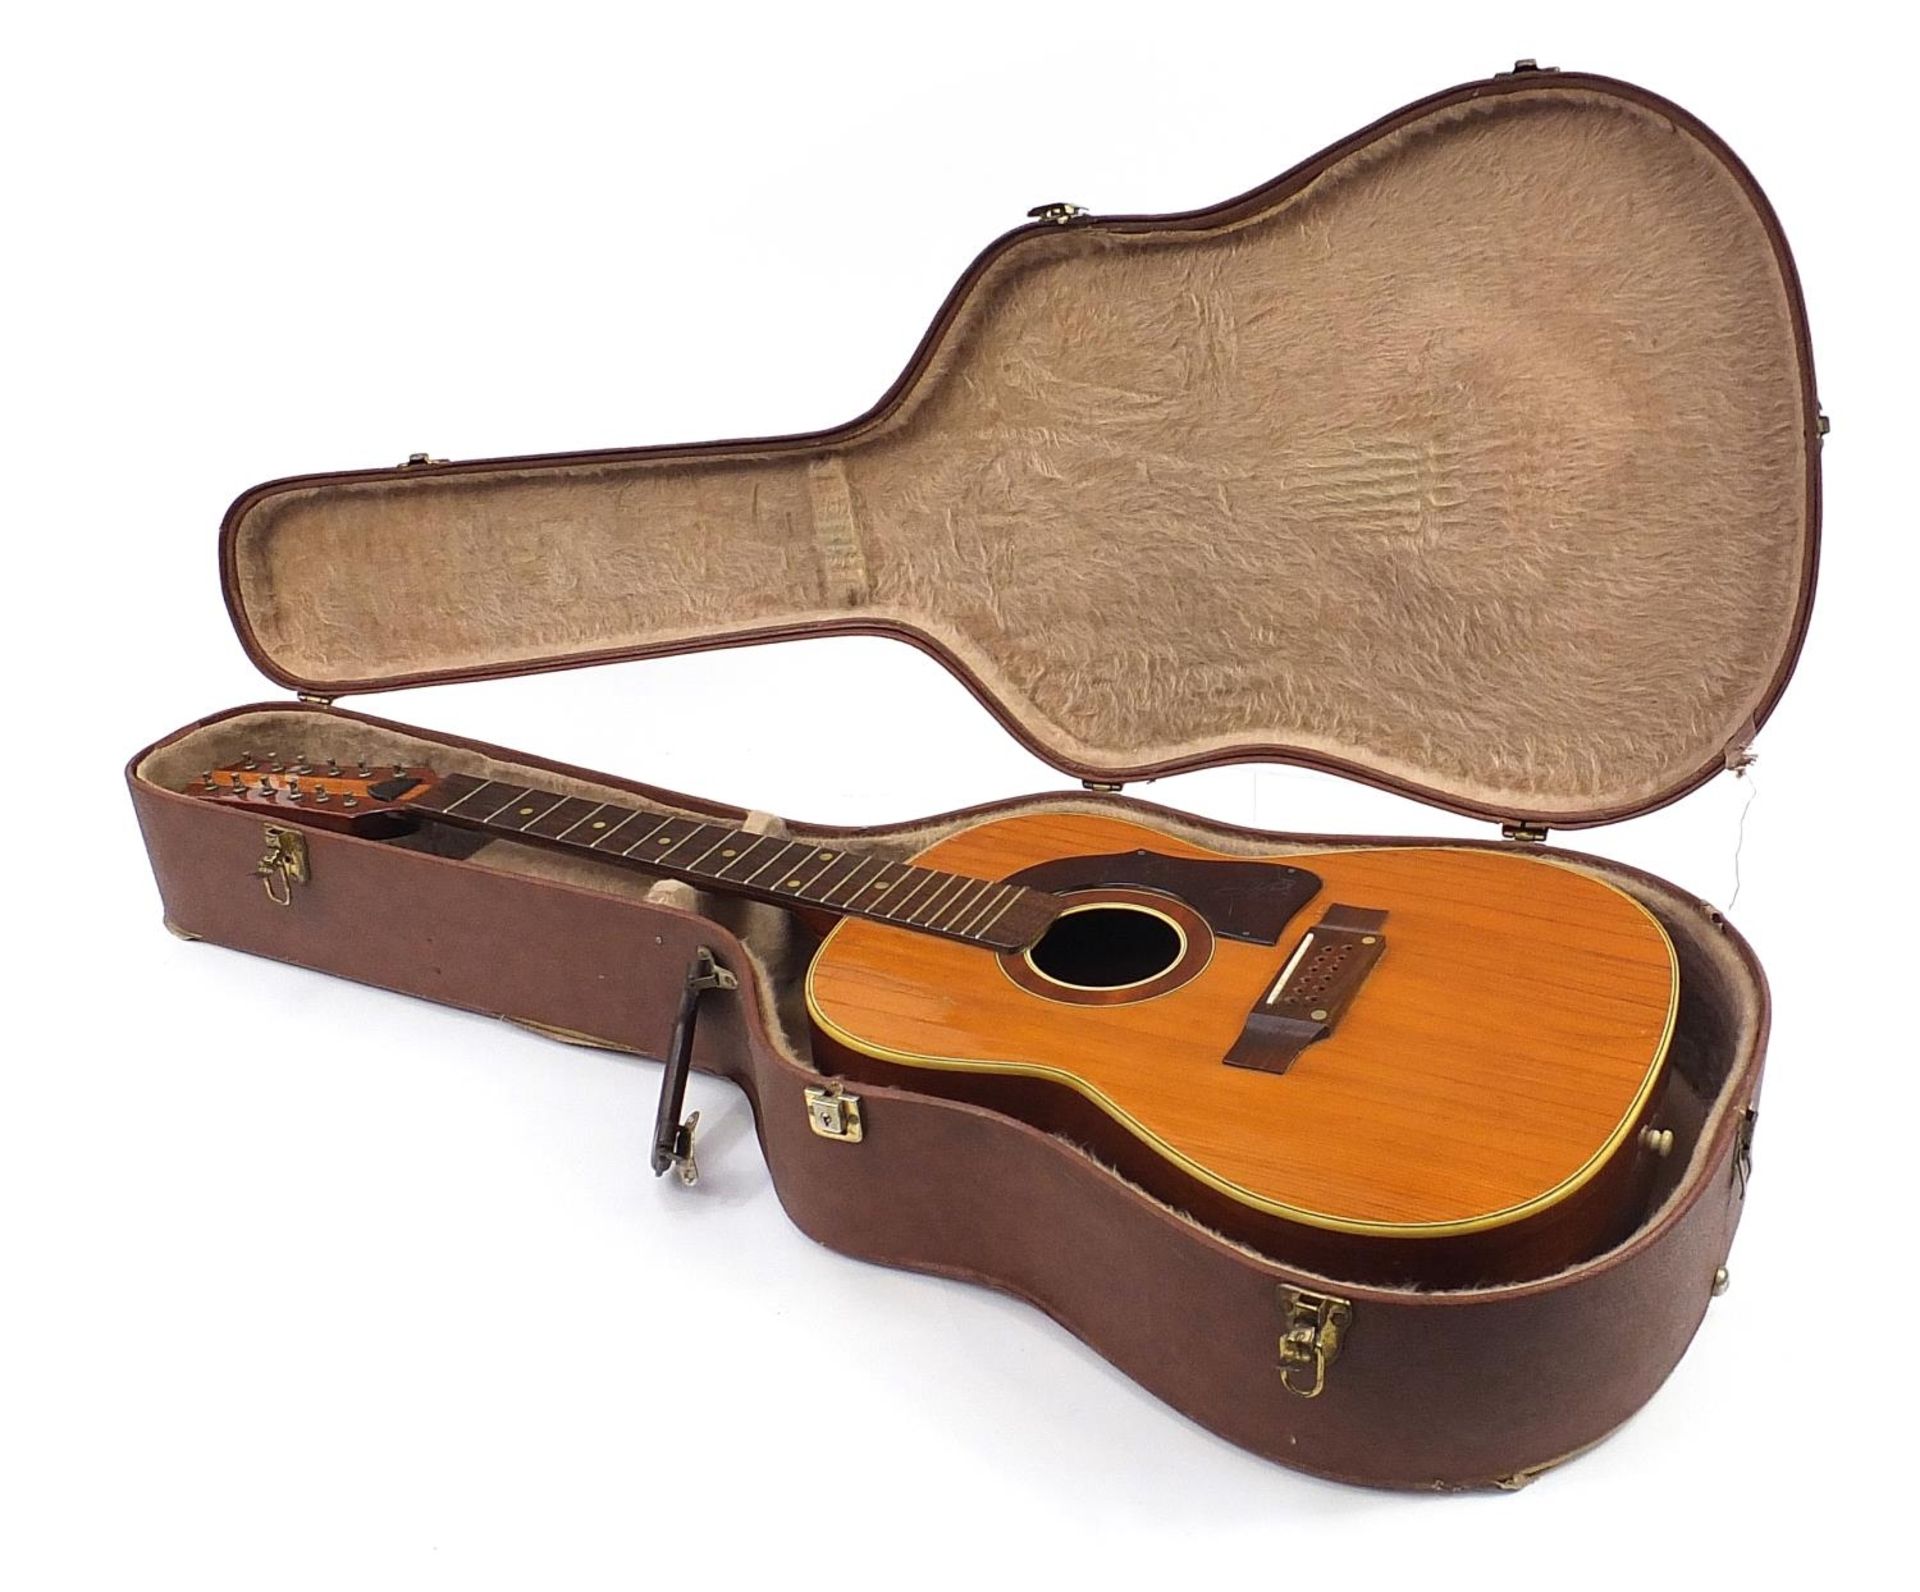 Hoyer, German wooden twelve string acoustic guitar with protective carry case - Image 5 of 6